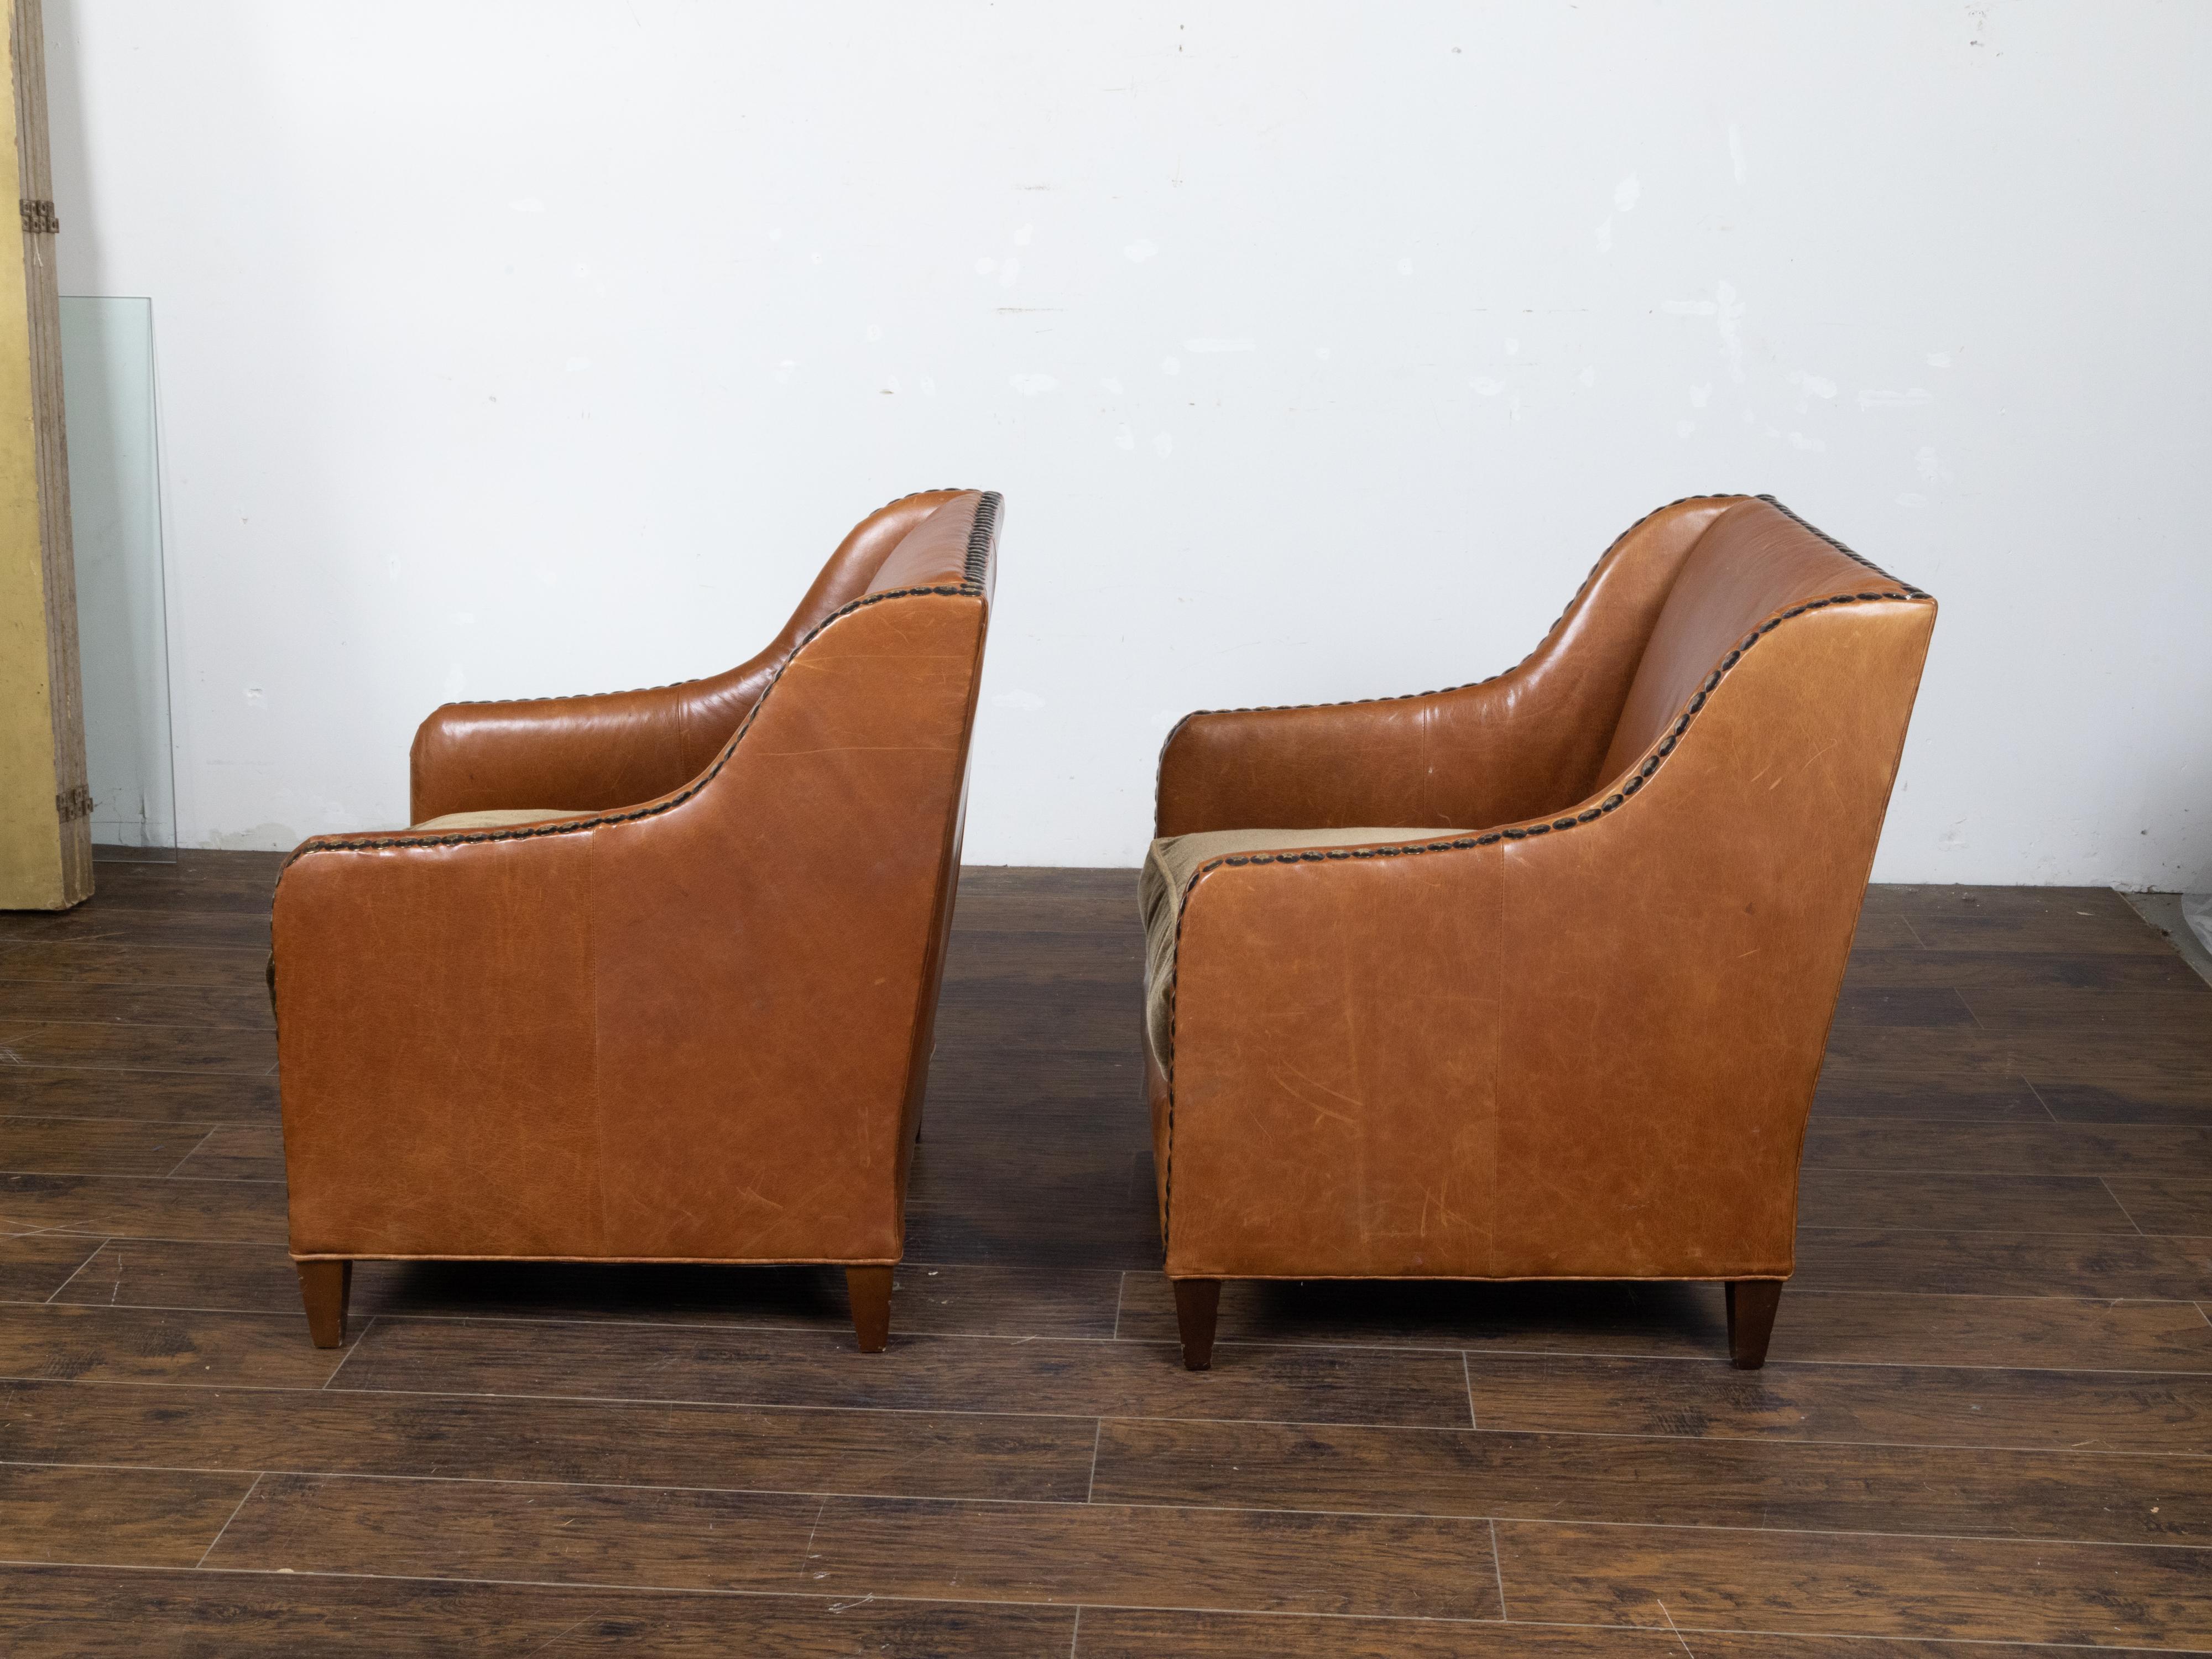 20th Century English Midcentury Brown Leather Club Chairs with Velvet Cushions and Nailheads